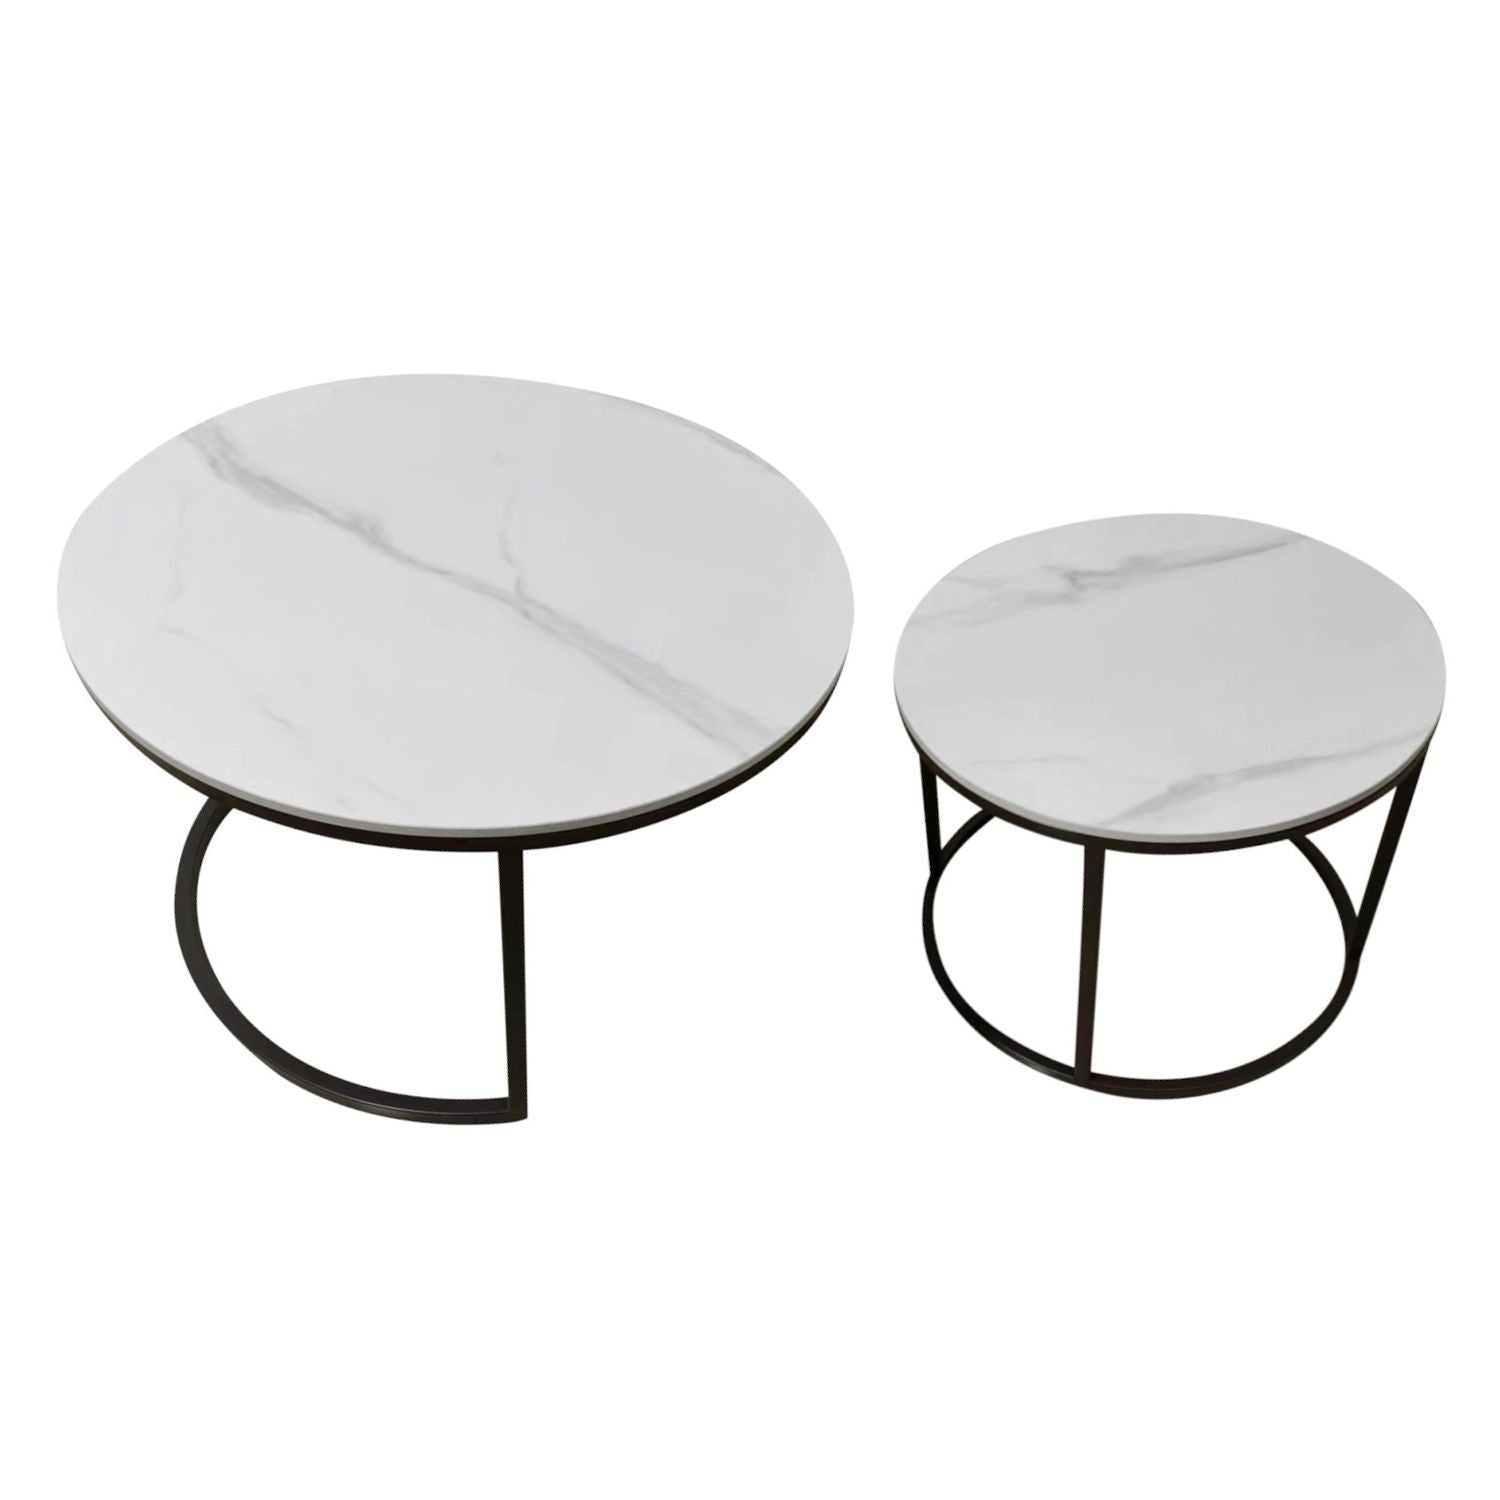 Bilbao Nest Of Tables - Round